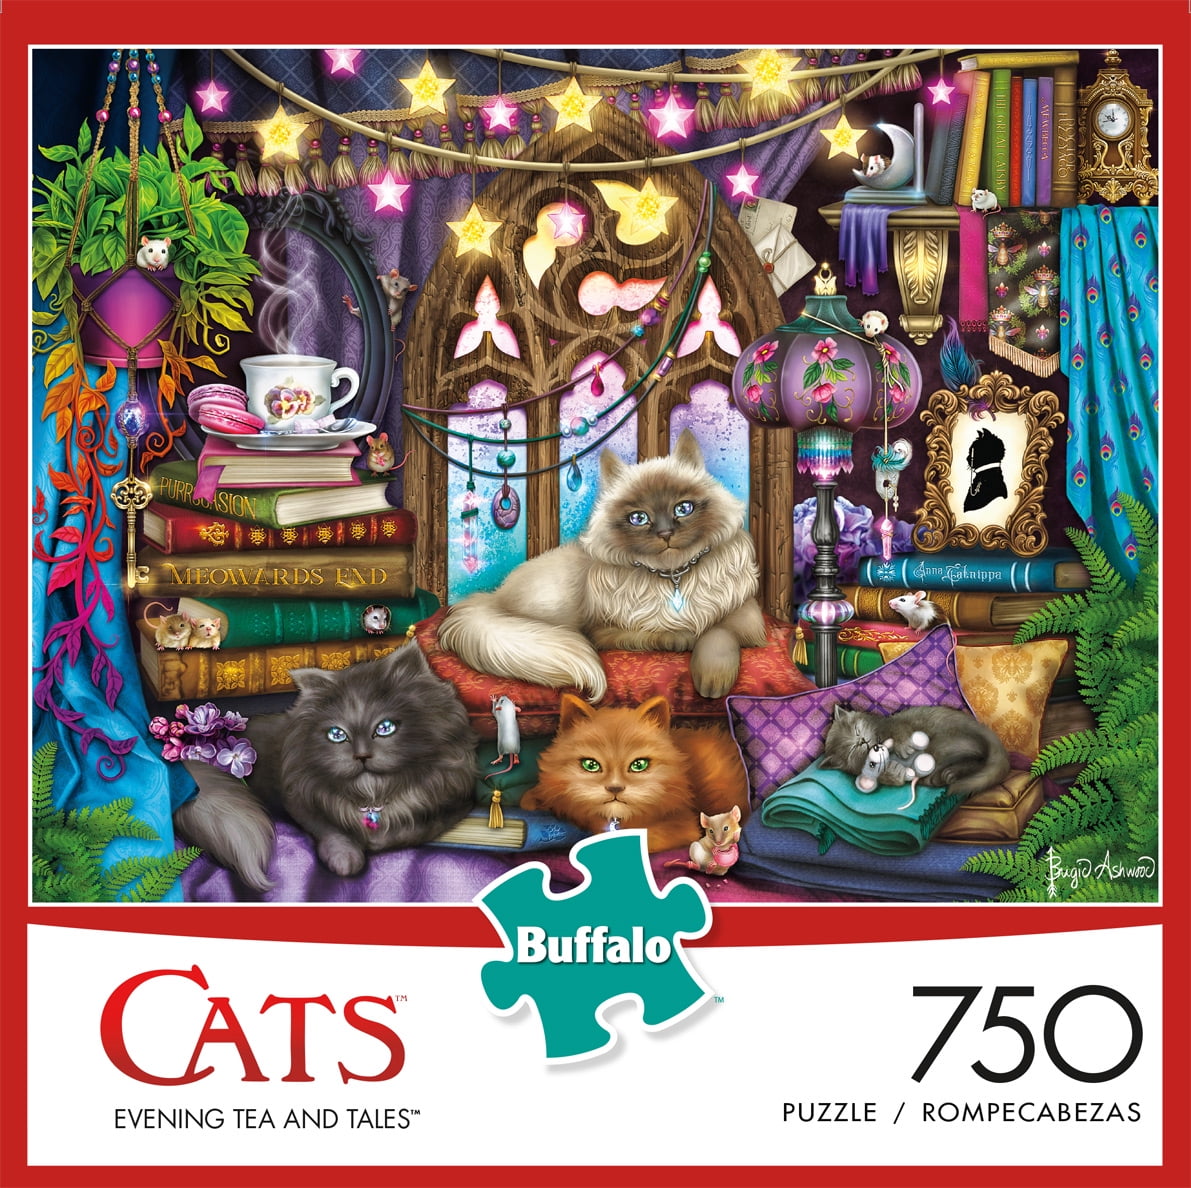 Cats “spice Rack Kittens” 750 PC Jigsaw Puzzle Buffalo Games for sale online